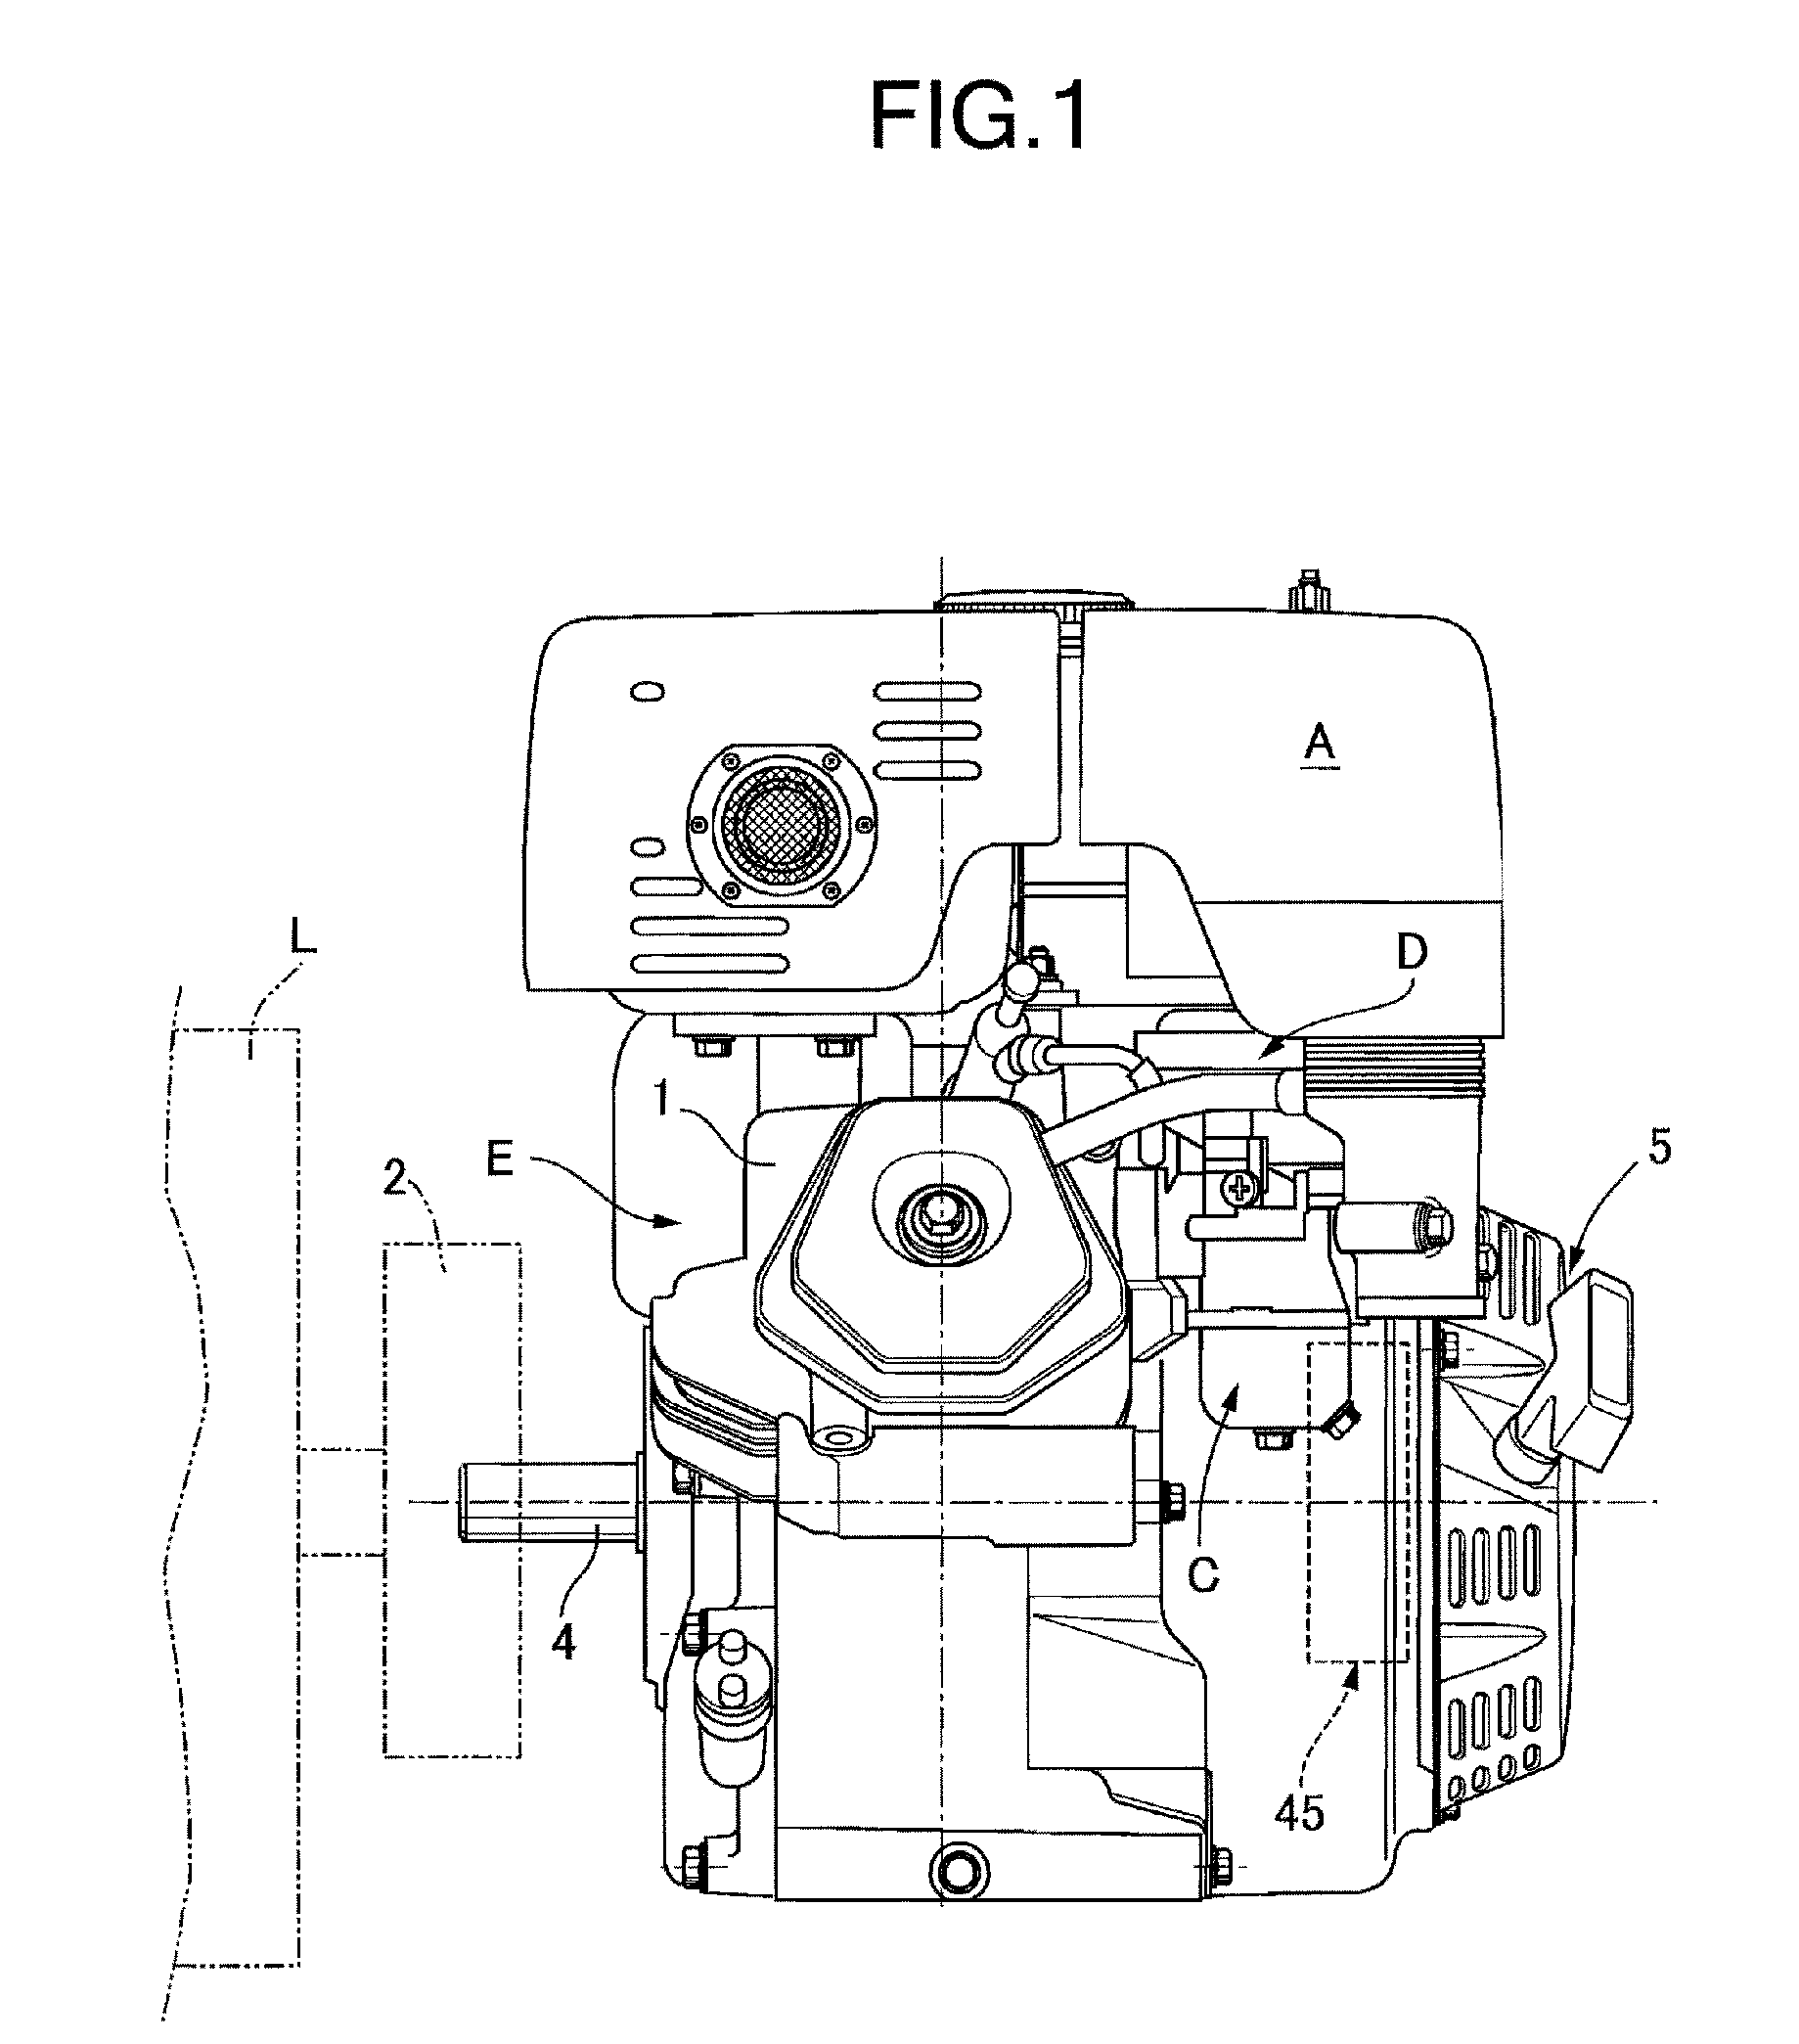 Control apparatus for general-purpose internal combustion engine